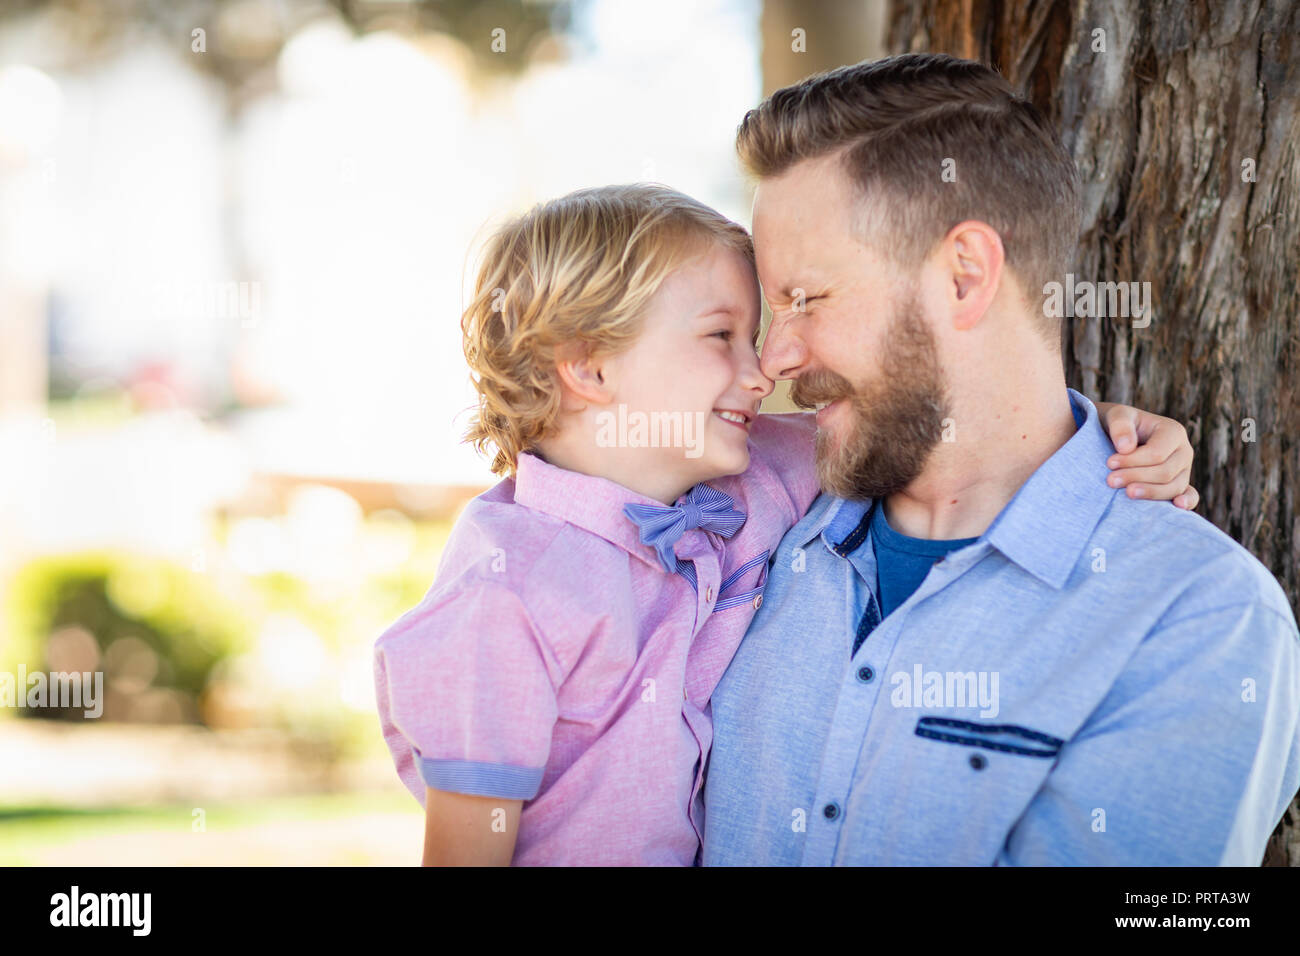 Young Caucasian Father And Son Portrait At The Park. Stock Photo